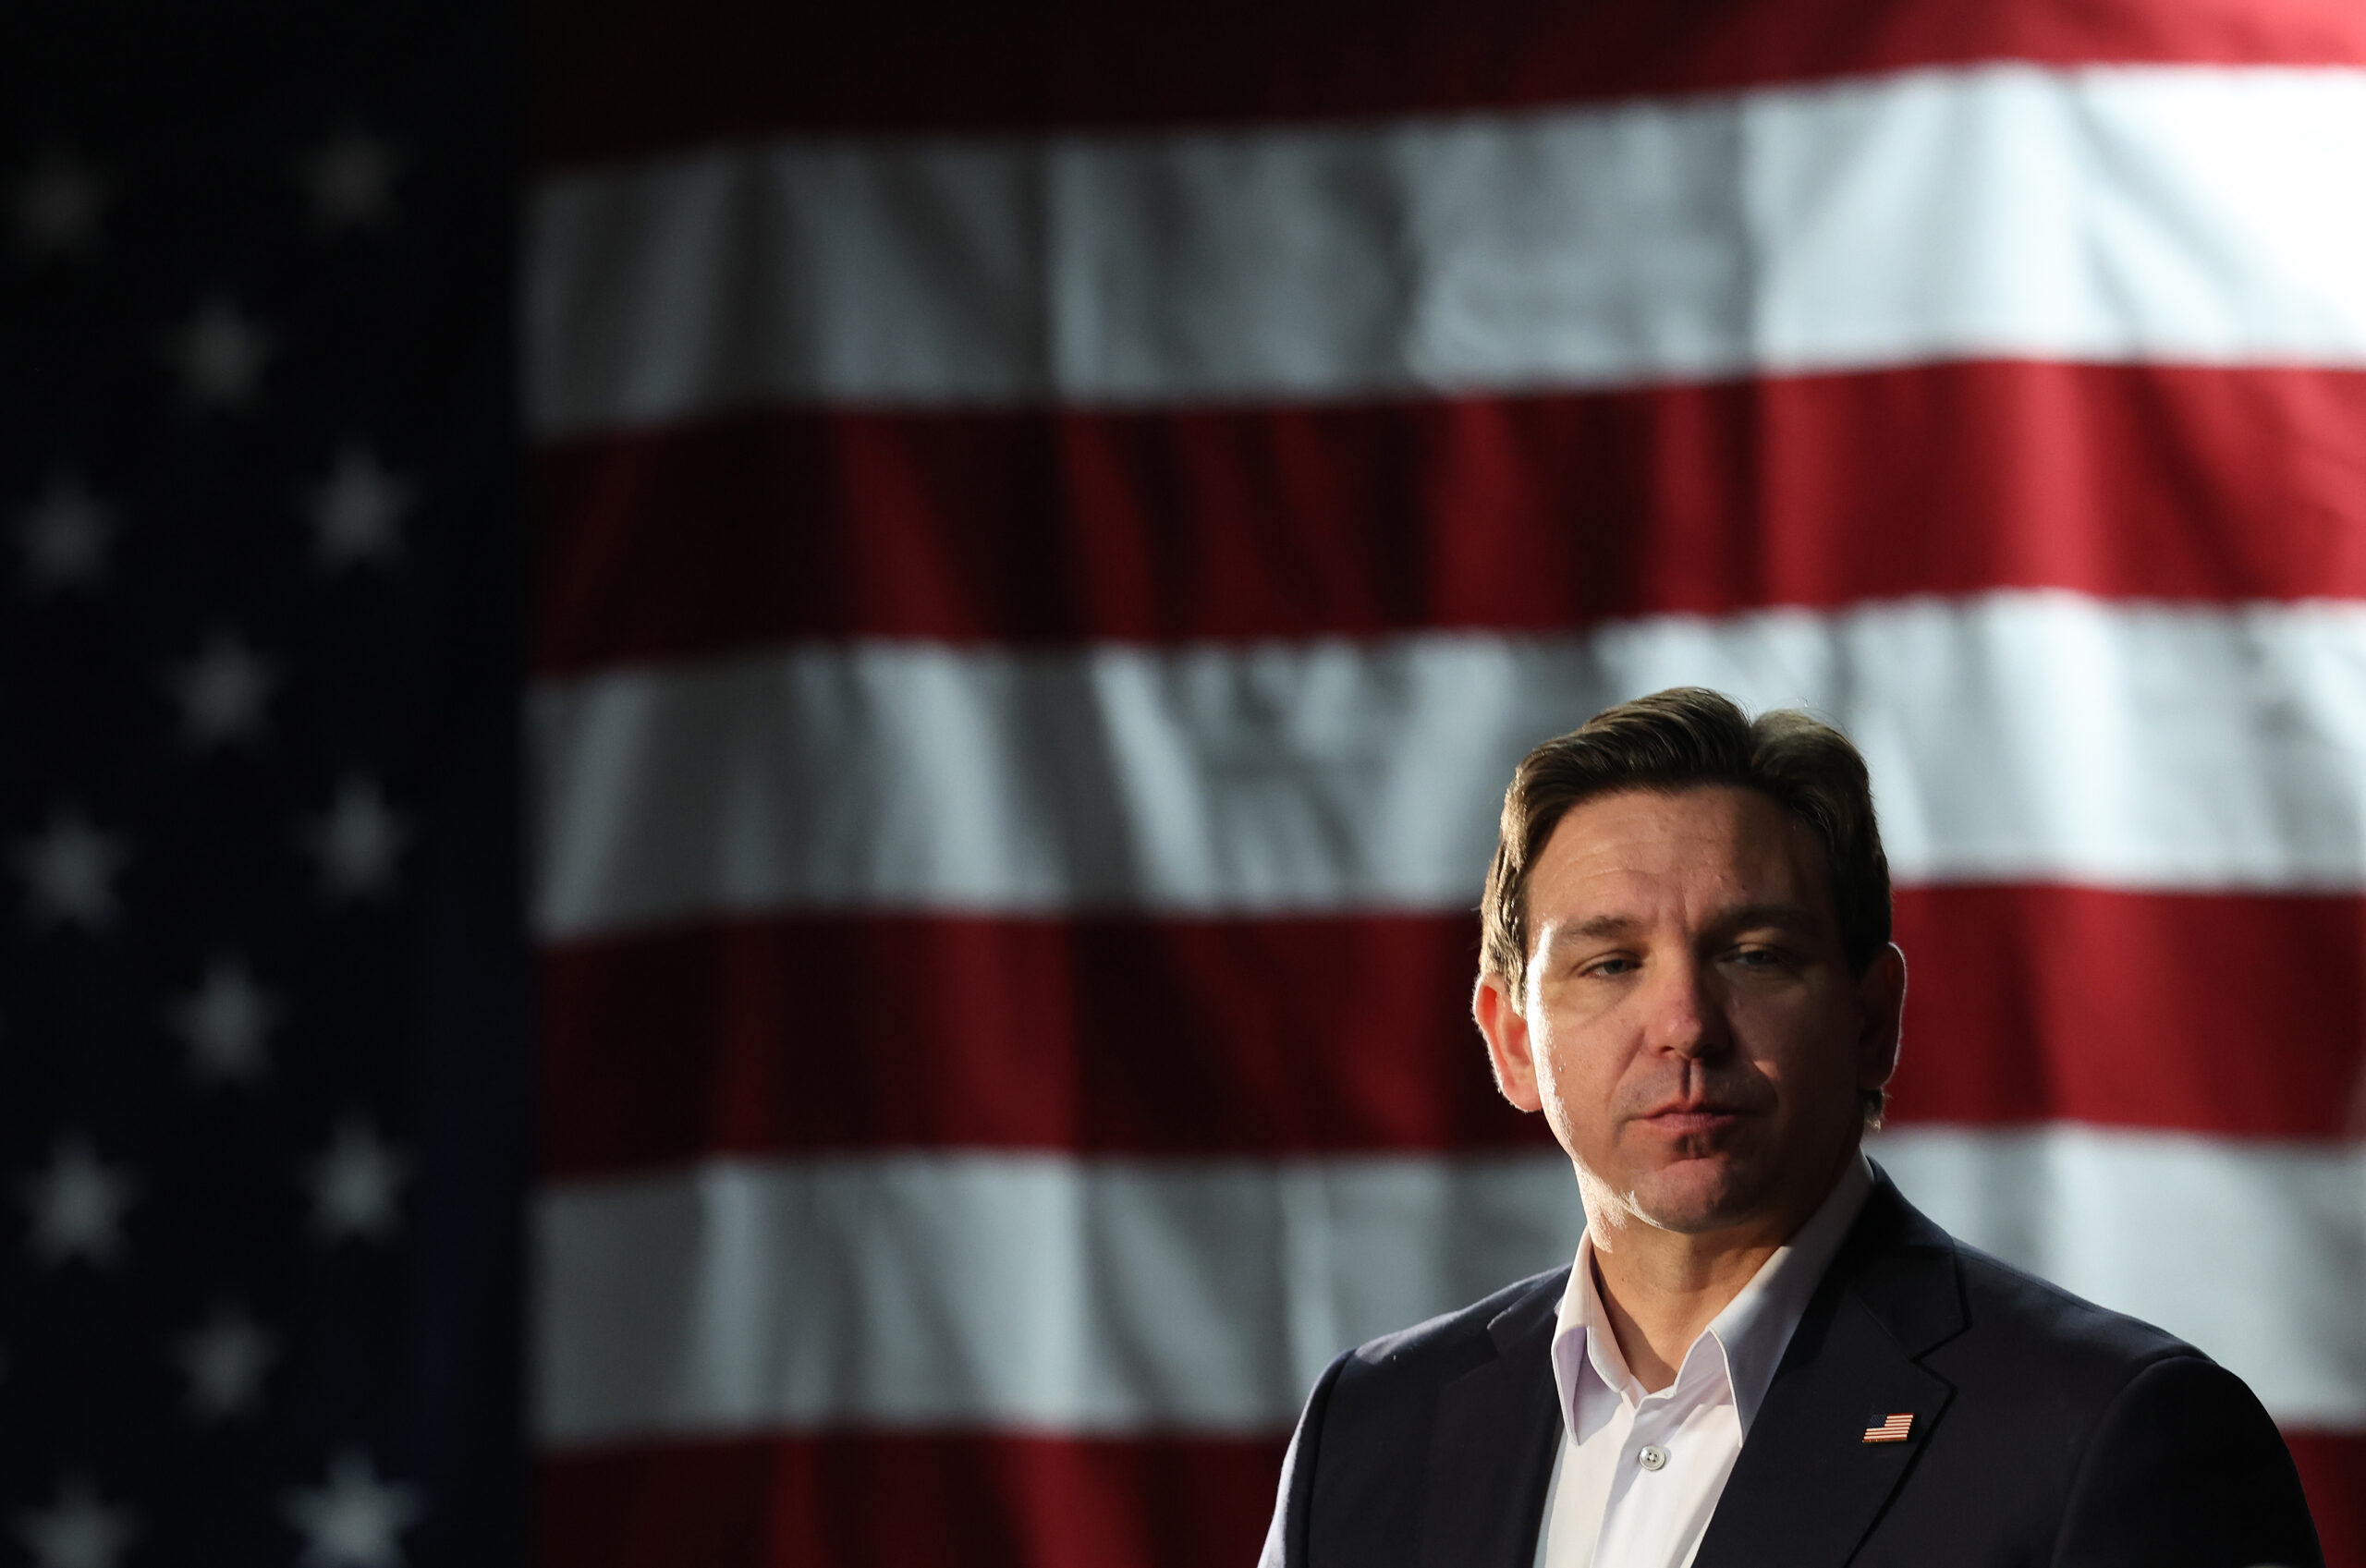 DeSantis Bows Out Before New Hampshire Embarrassment